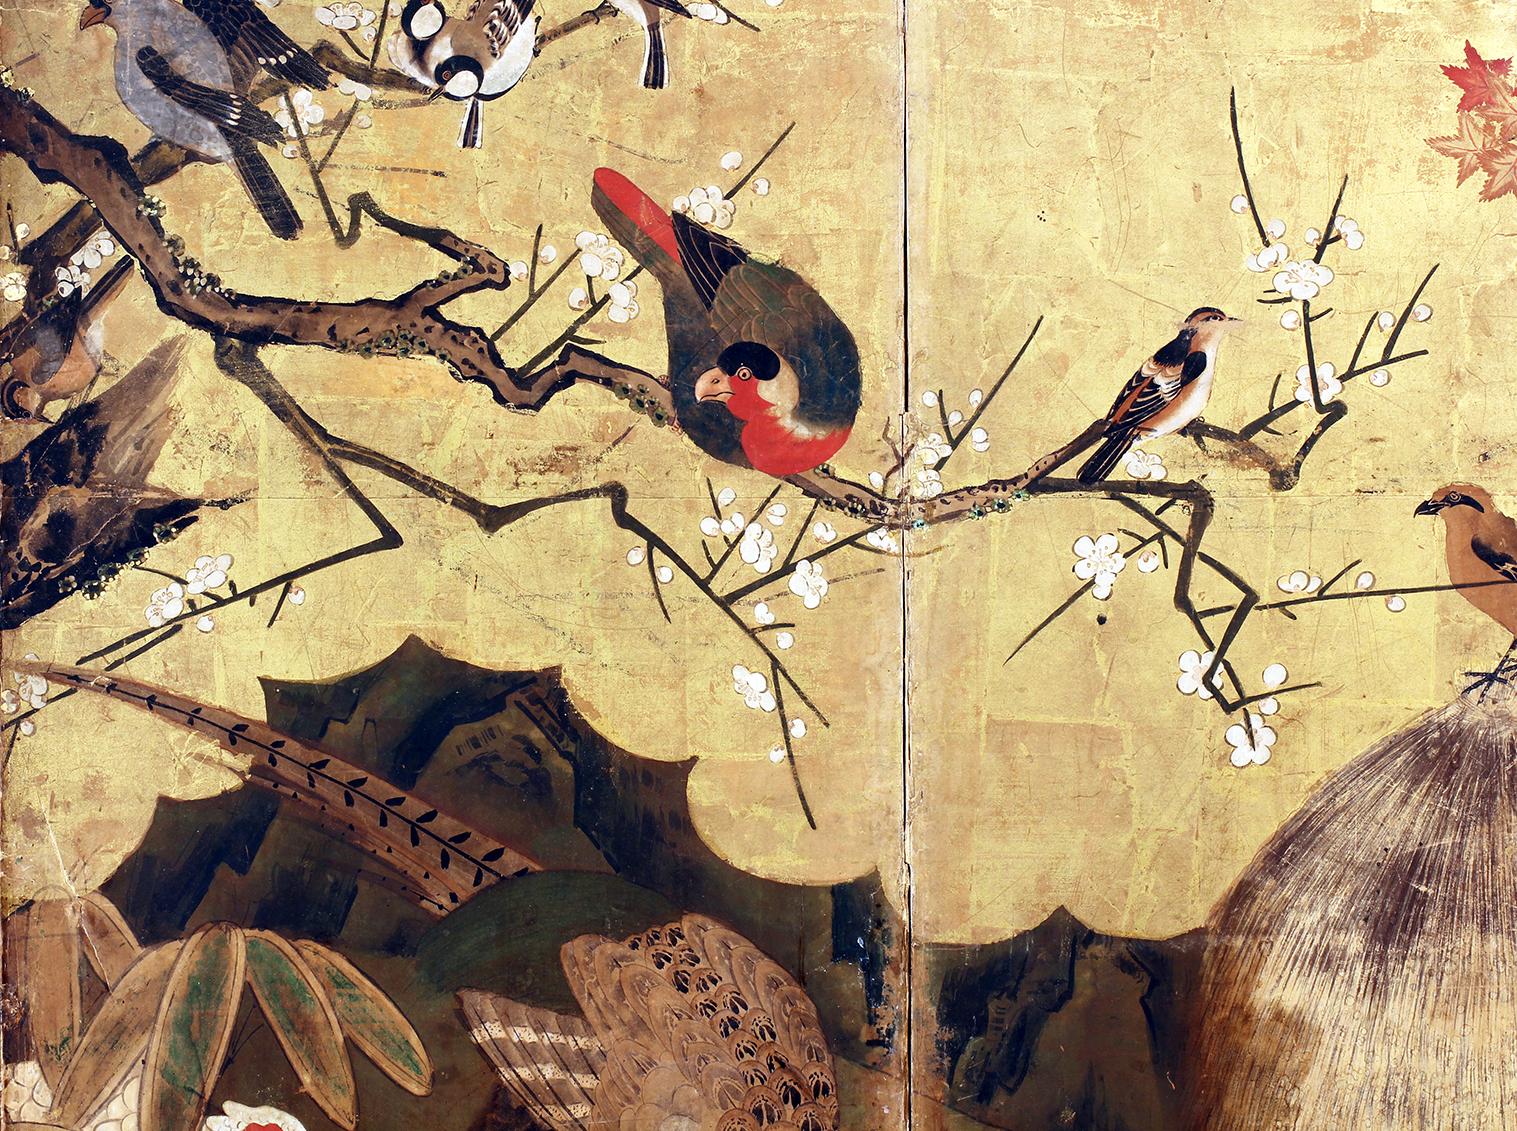 Six-panel Japanese screen, from the 18th century Rinpa school, depicting a spring landscape with many birds on sakura, bamboo and maple trees.
This work of rare quality is hand painted with mineral pigments on gold leaf and vegetable paper,